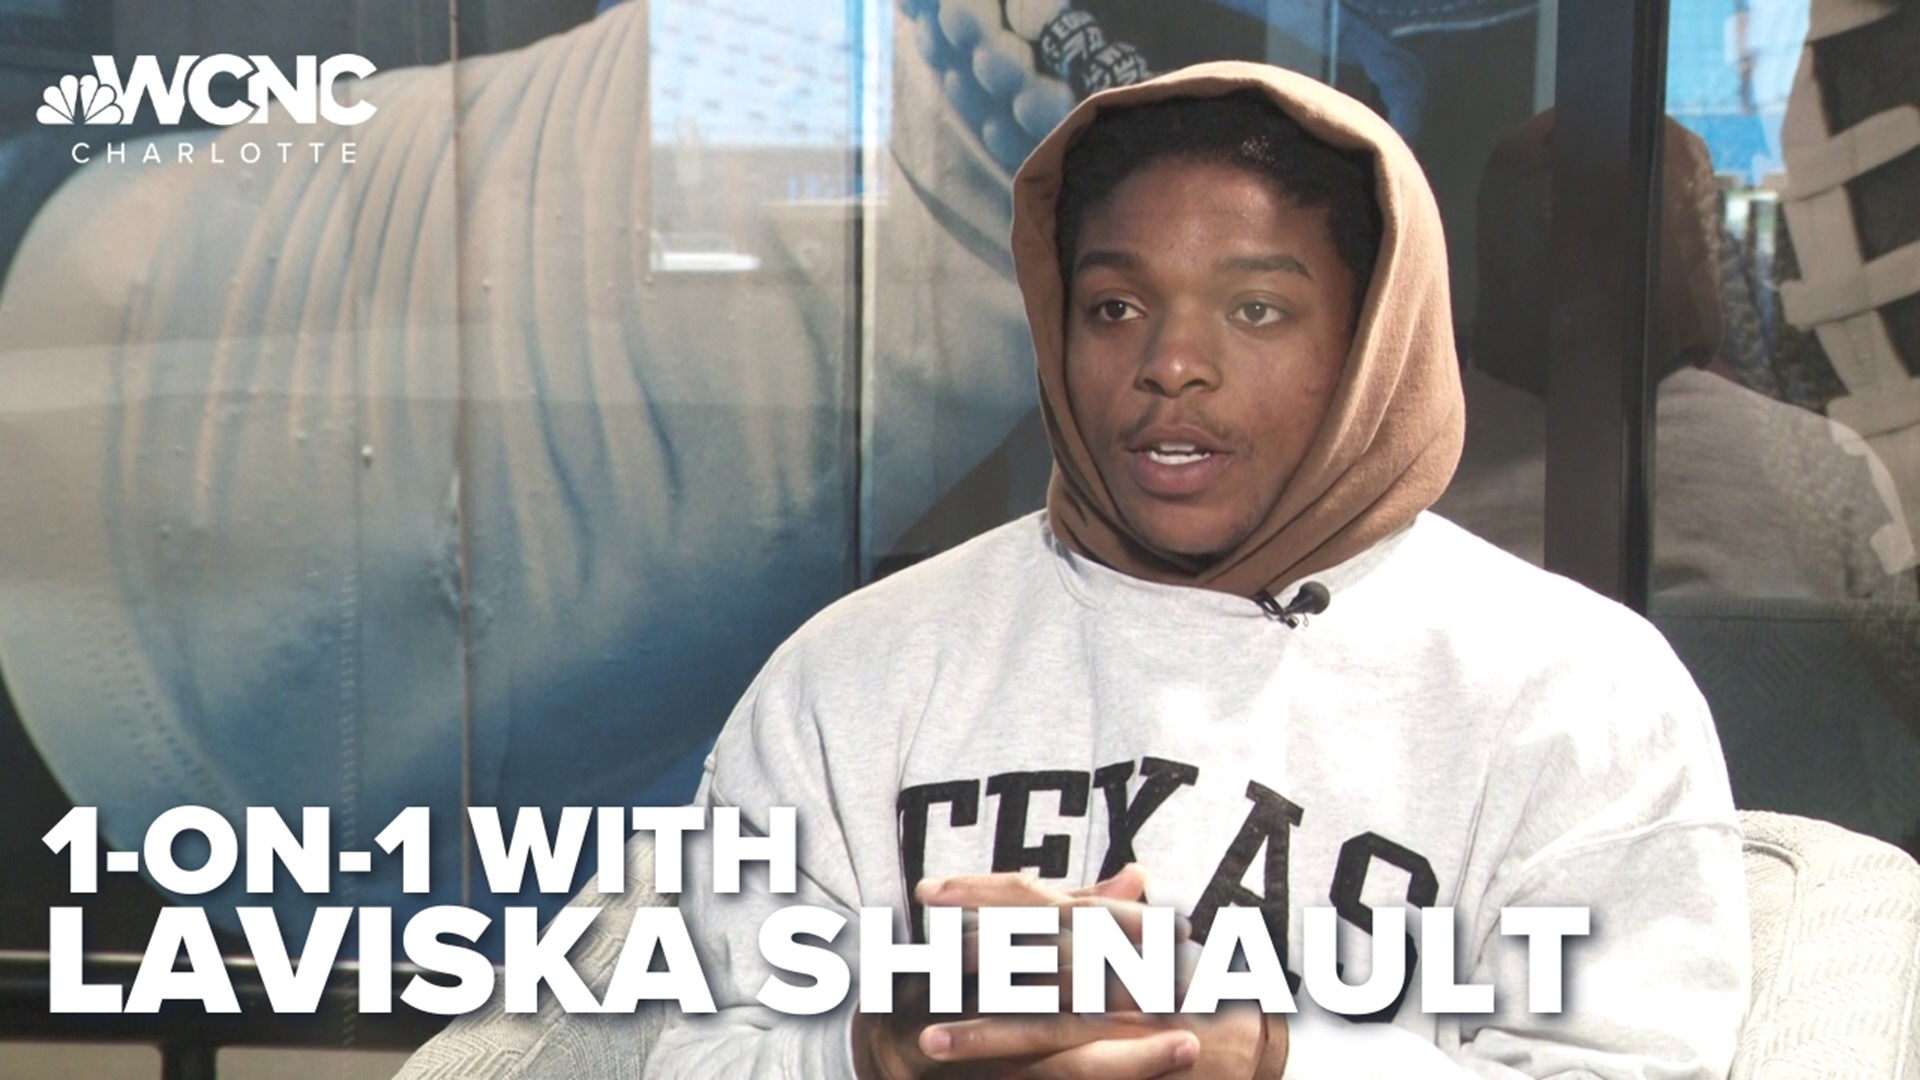 Ashley Stroehlein goes 1-on-1 with the wide receiver.